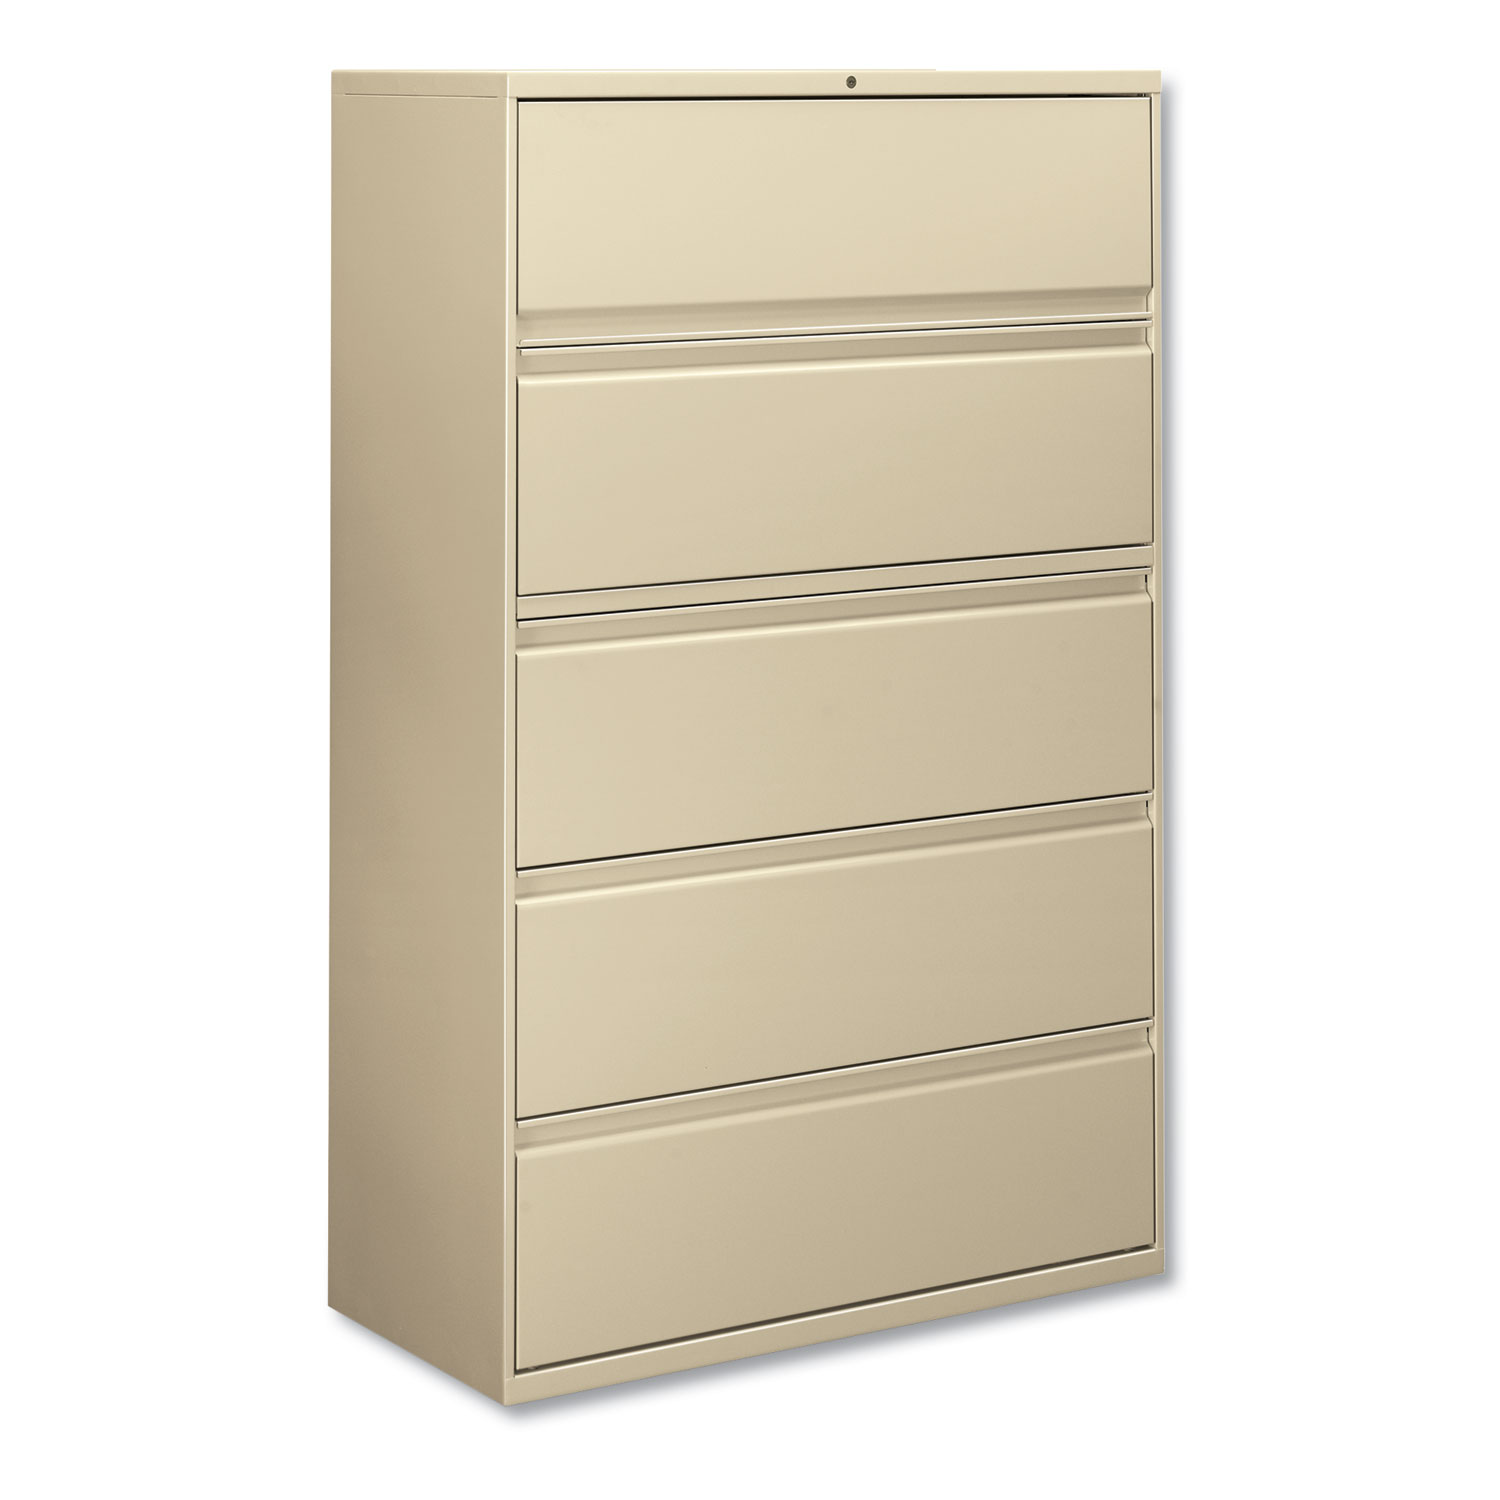 Five-Drawer Lateral File Cabinet, 42w x 18d x 64 1/4h, Putty